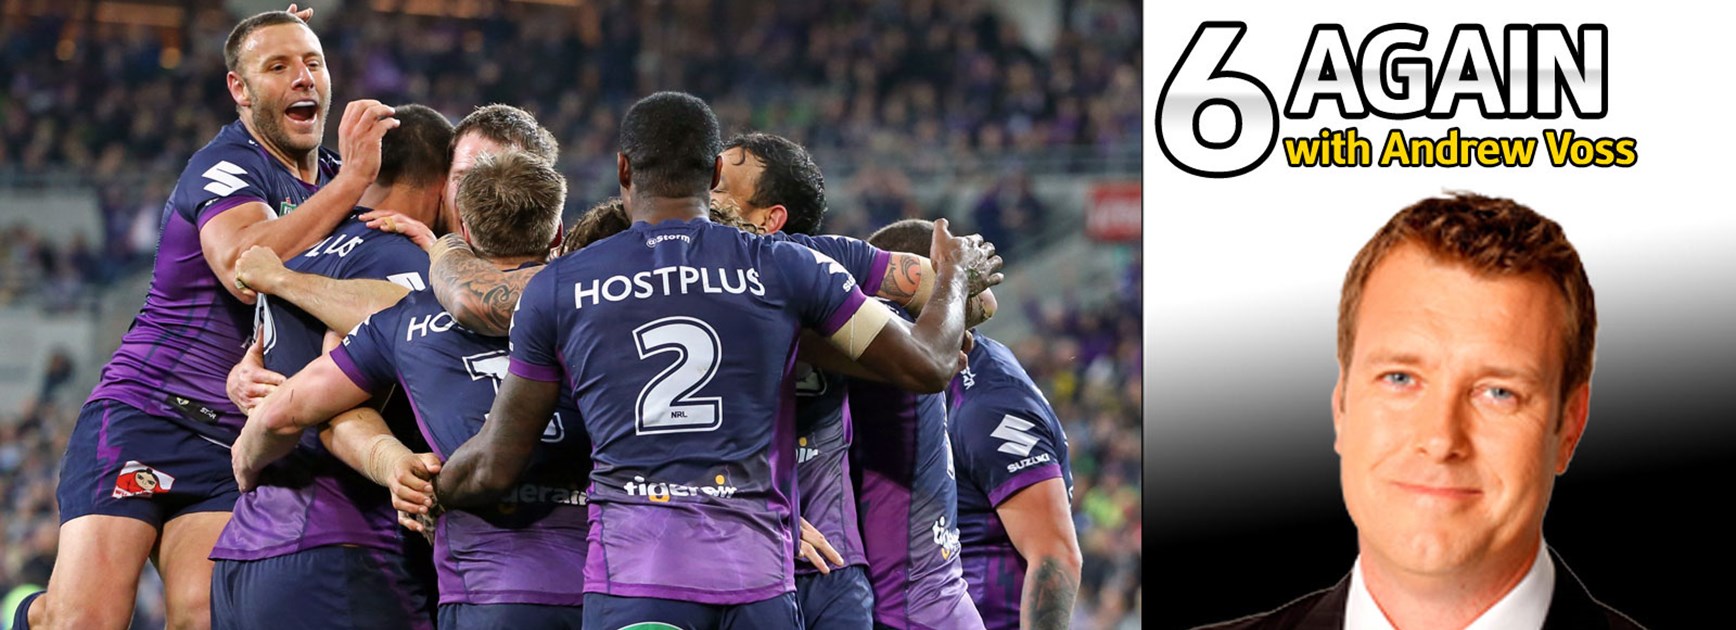 NRL.com columnist Andrew Voss claims there is no clear favourite for the 2016 NRL Telstra Premiership.